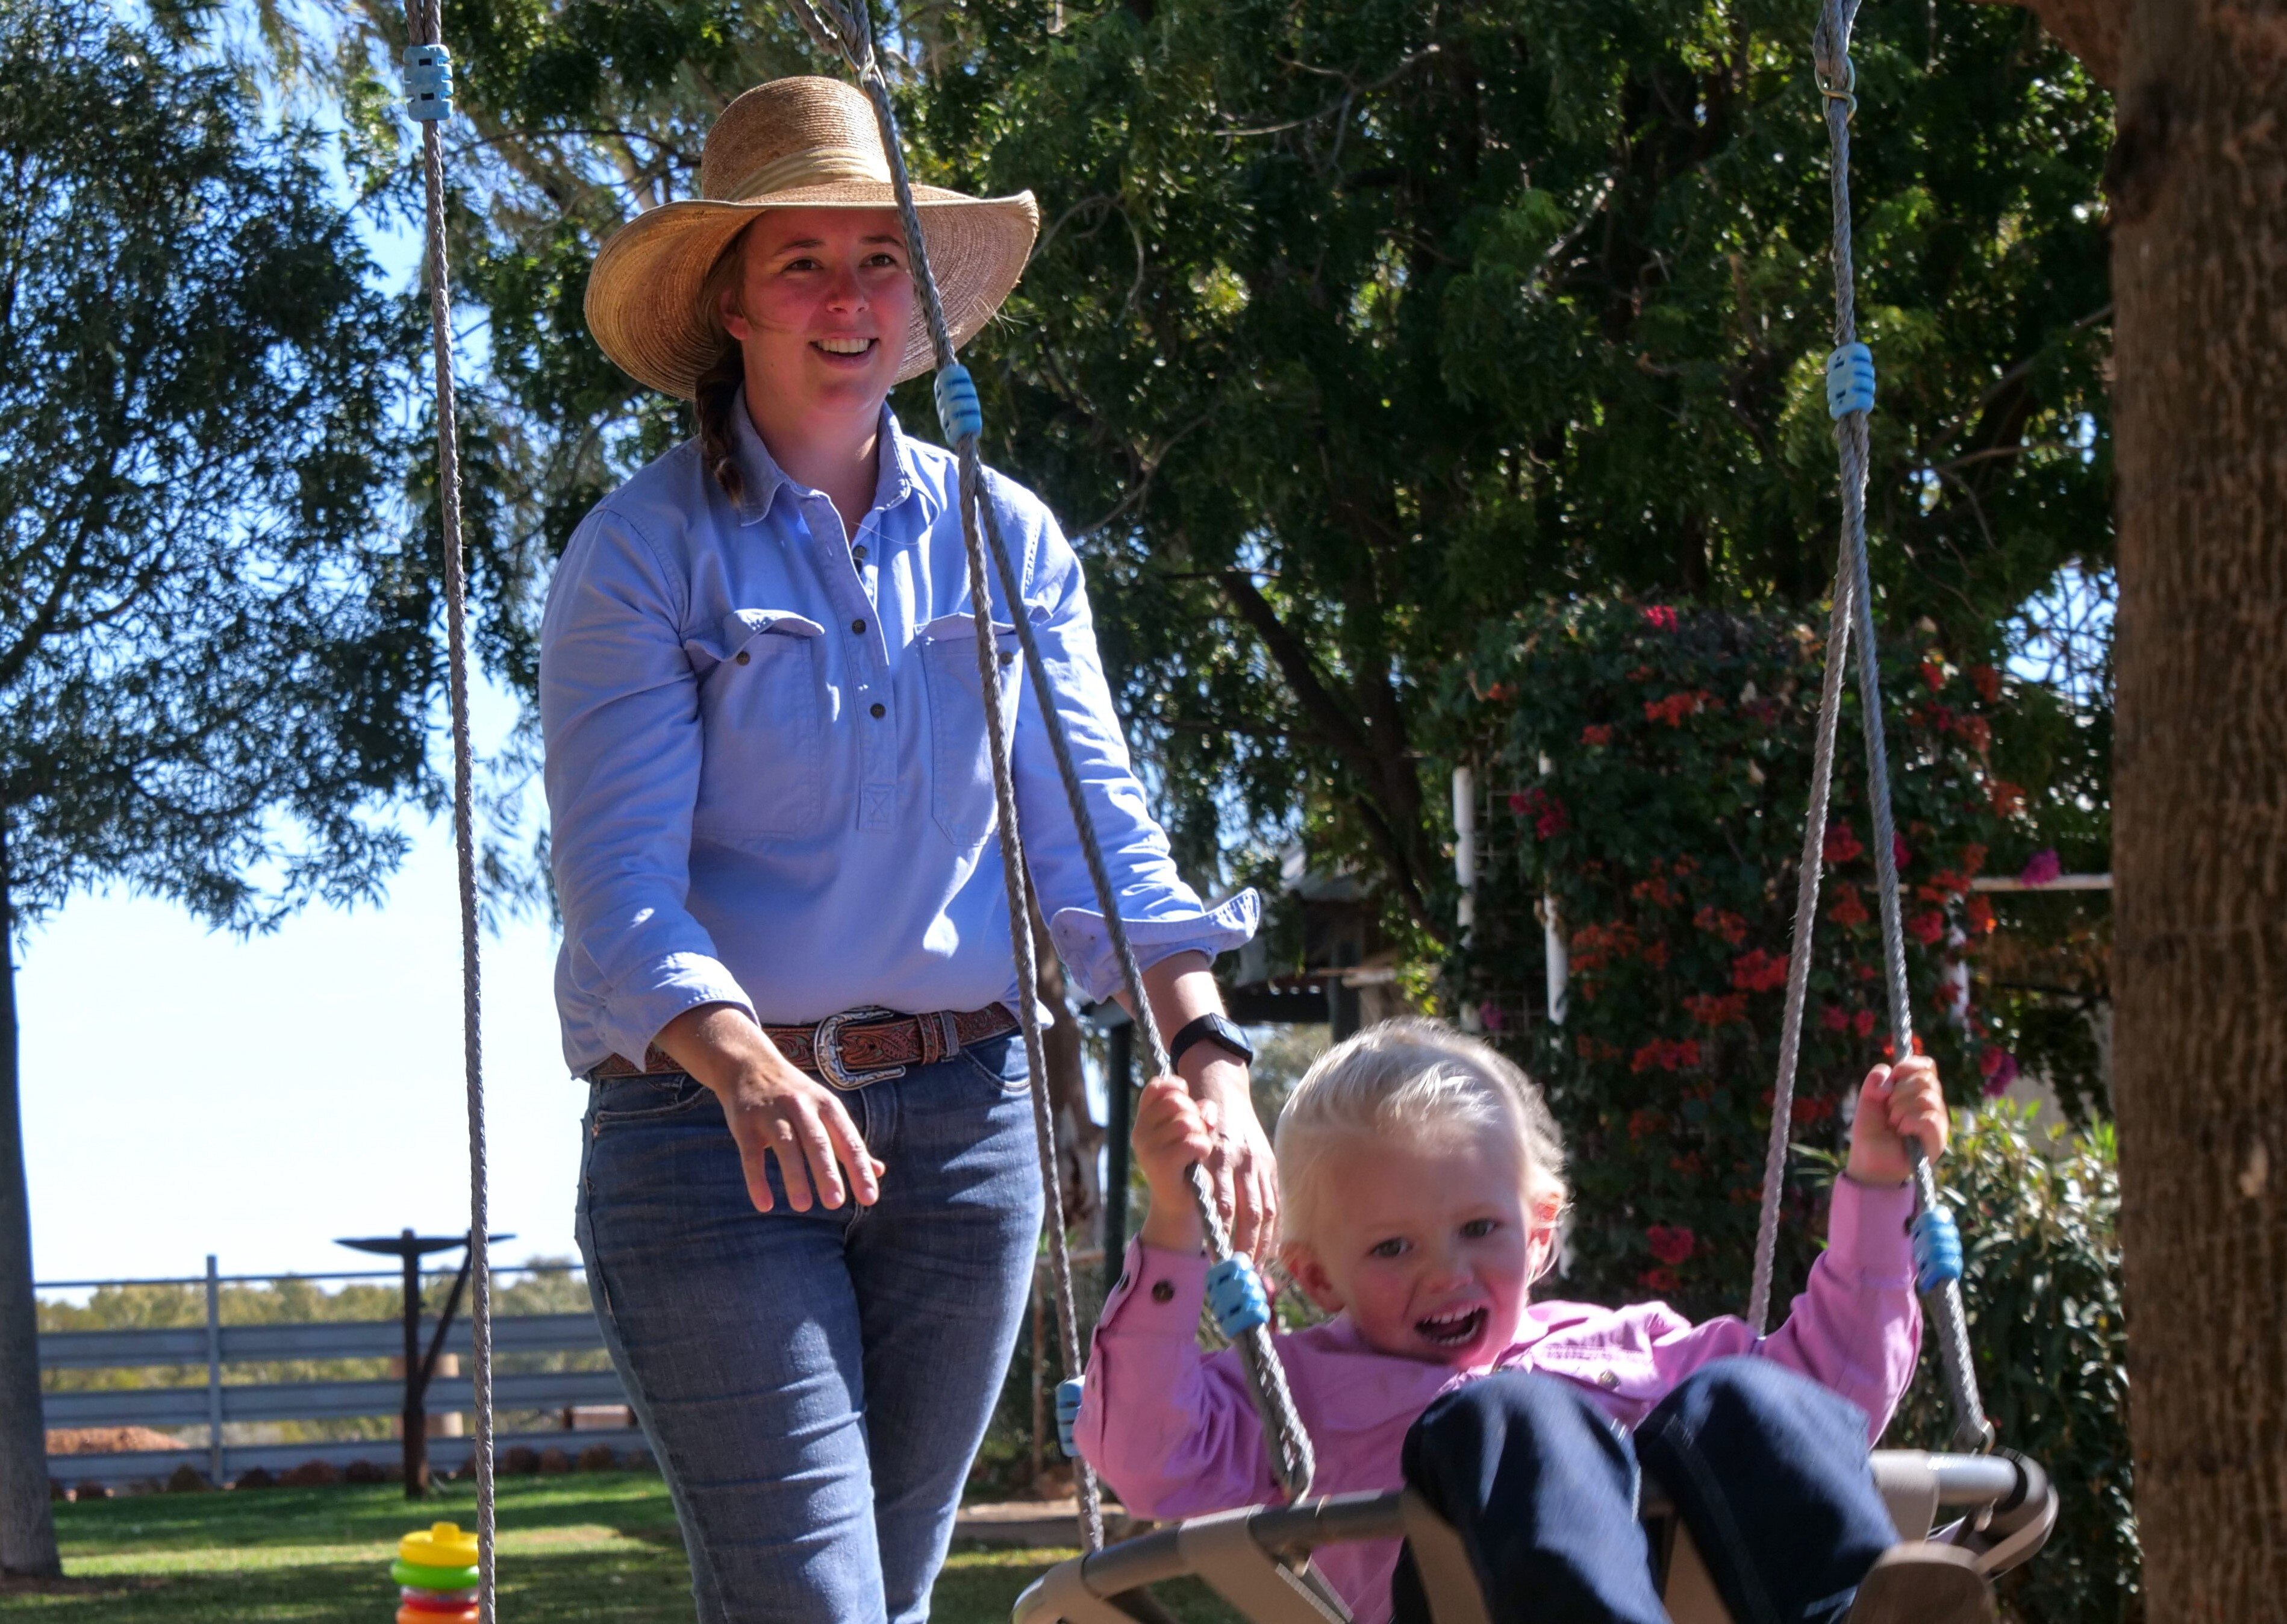 a woman in a blue button up shirt, jeans and cowgirl hat pushes her young blonde haired daughter on a blue swing in a yard